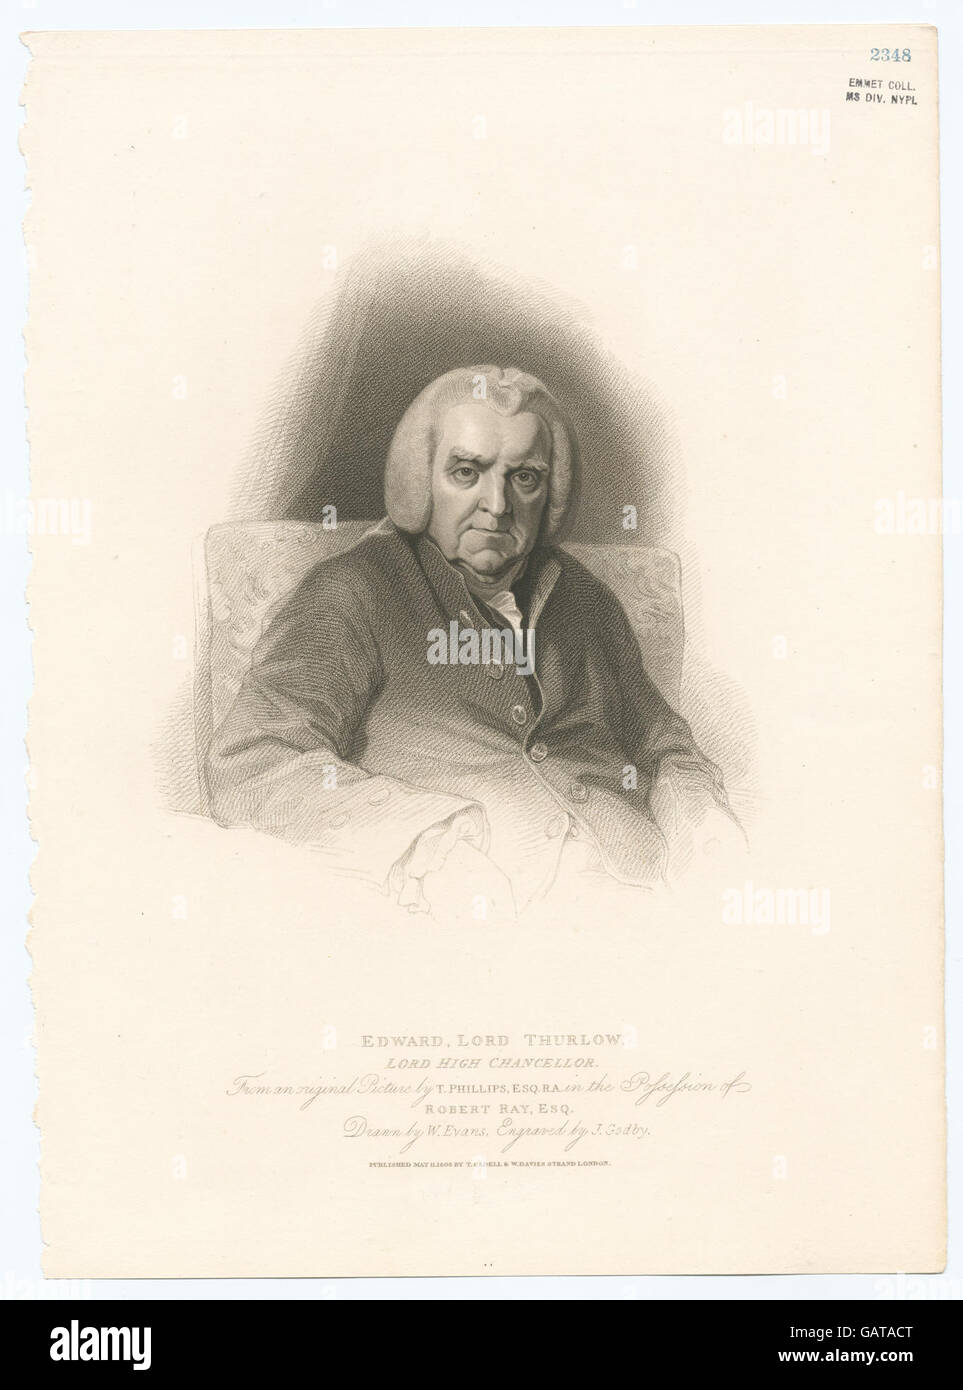 Edward, Lord Thurlow, Lord High Chancellor (Hades-253911-478706) Stockfoto